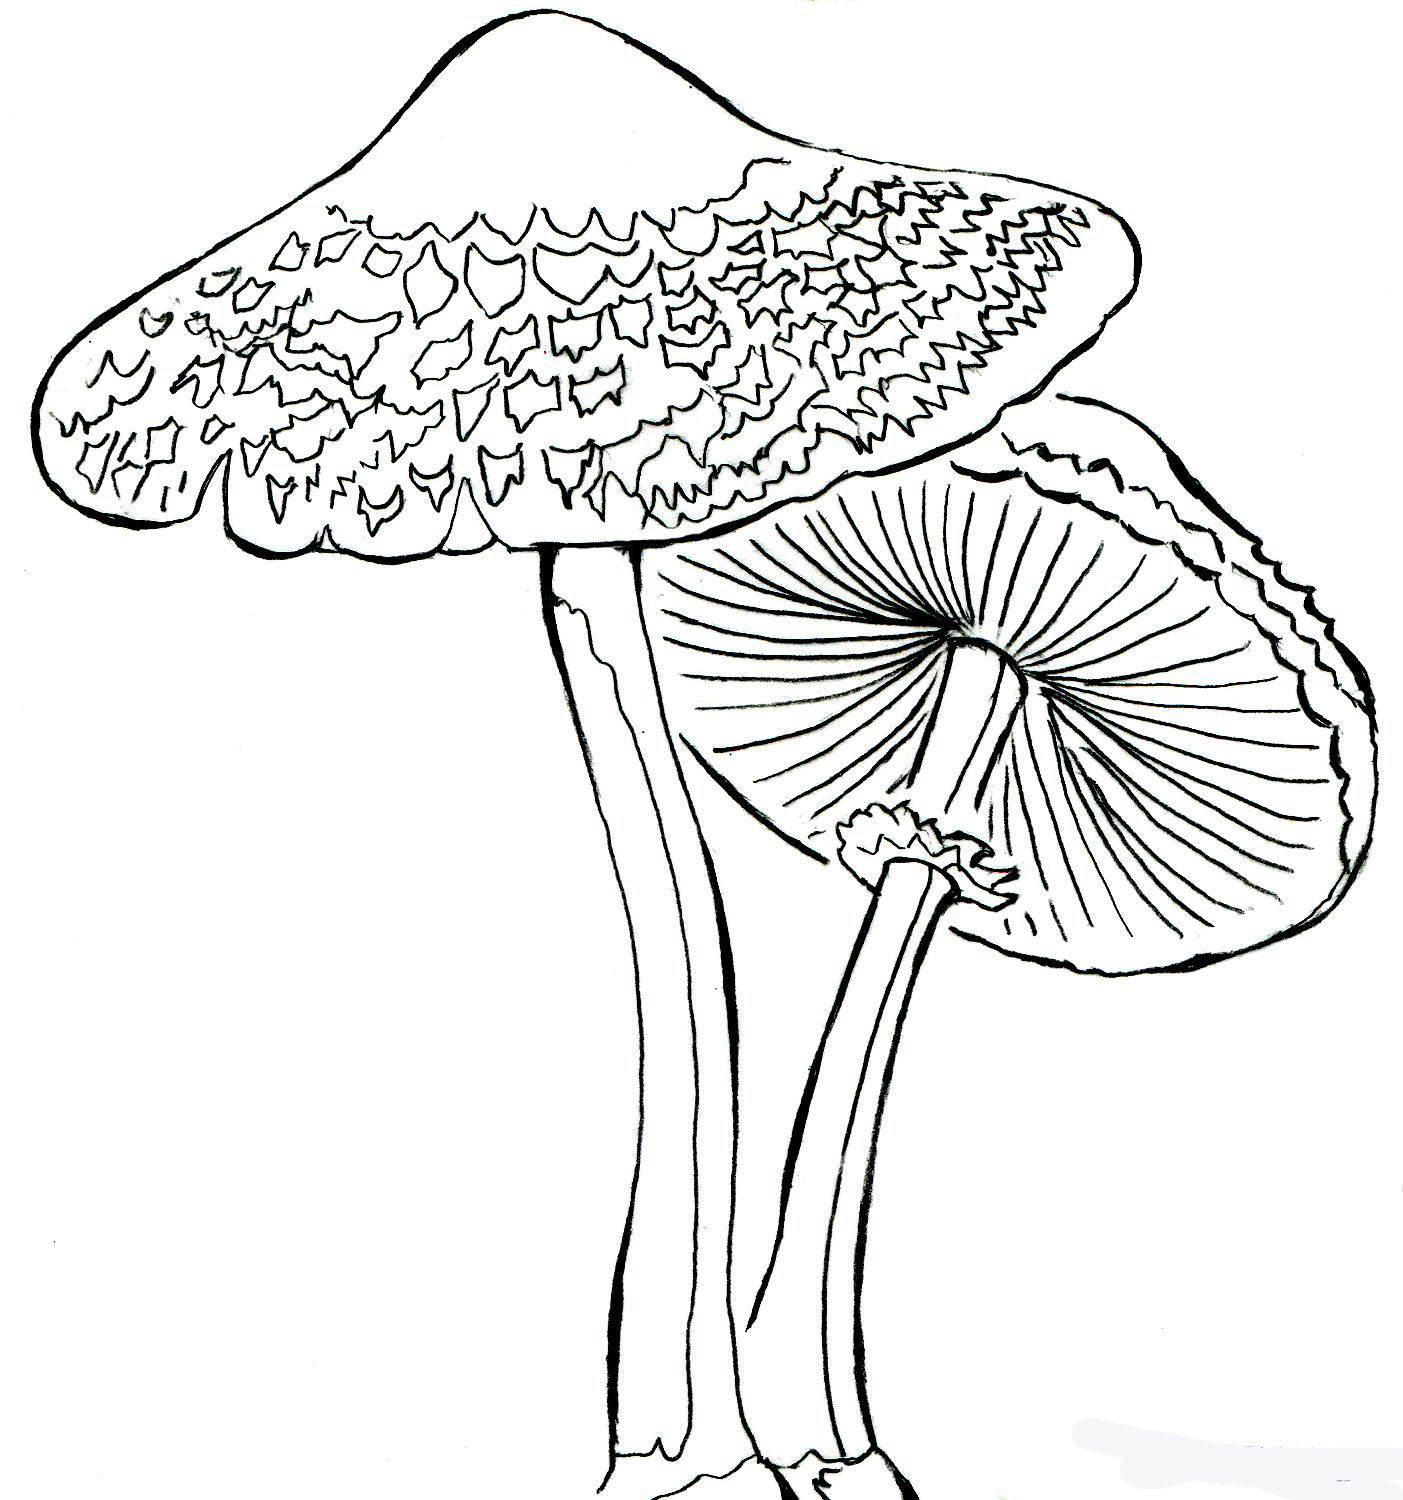 how-to-draw-realistic-mushrooms-step-9_1_000000107005_5